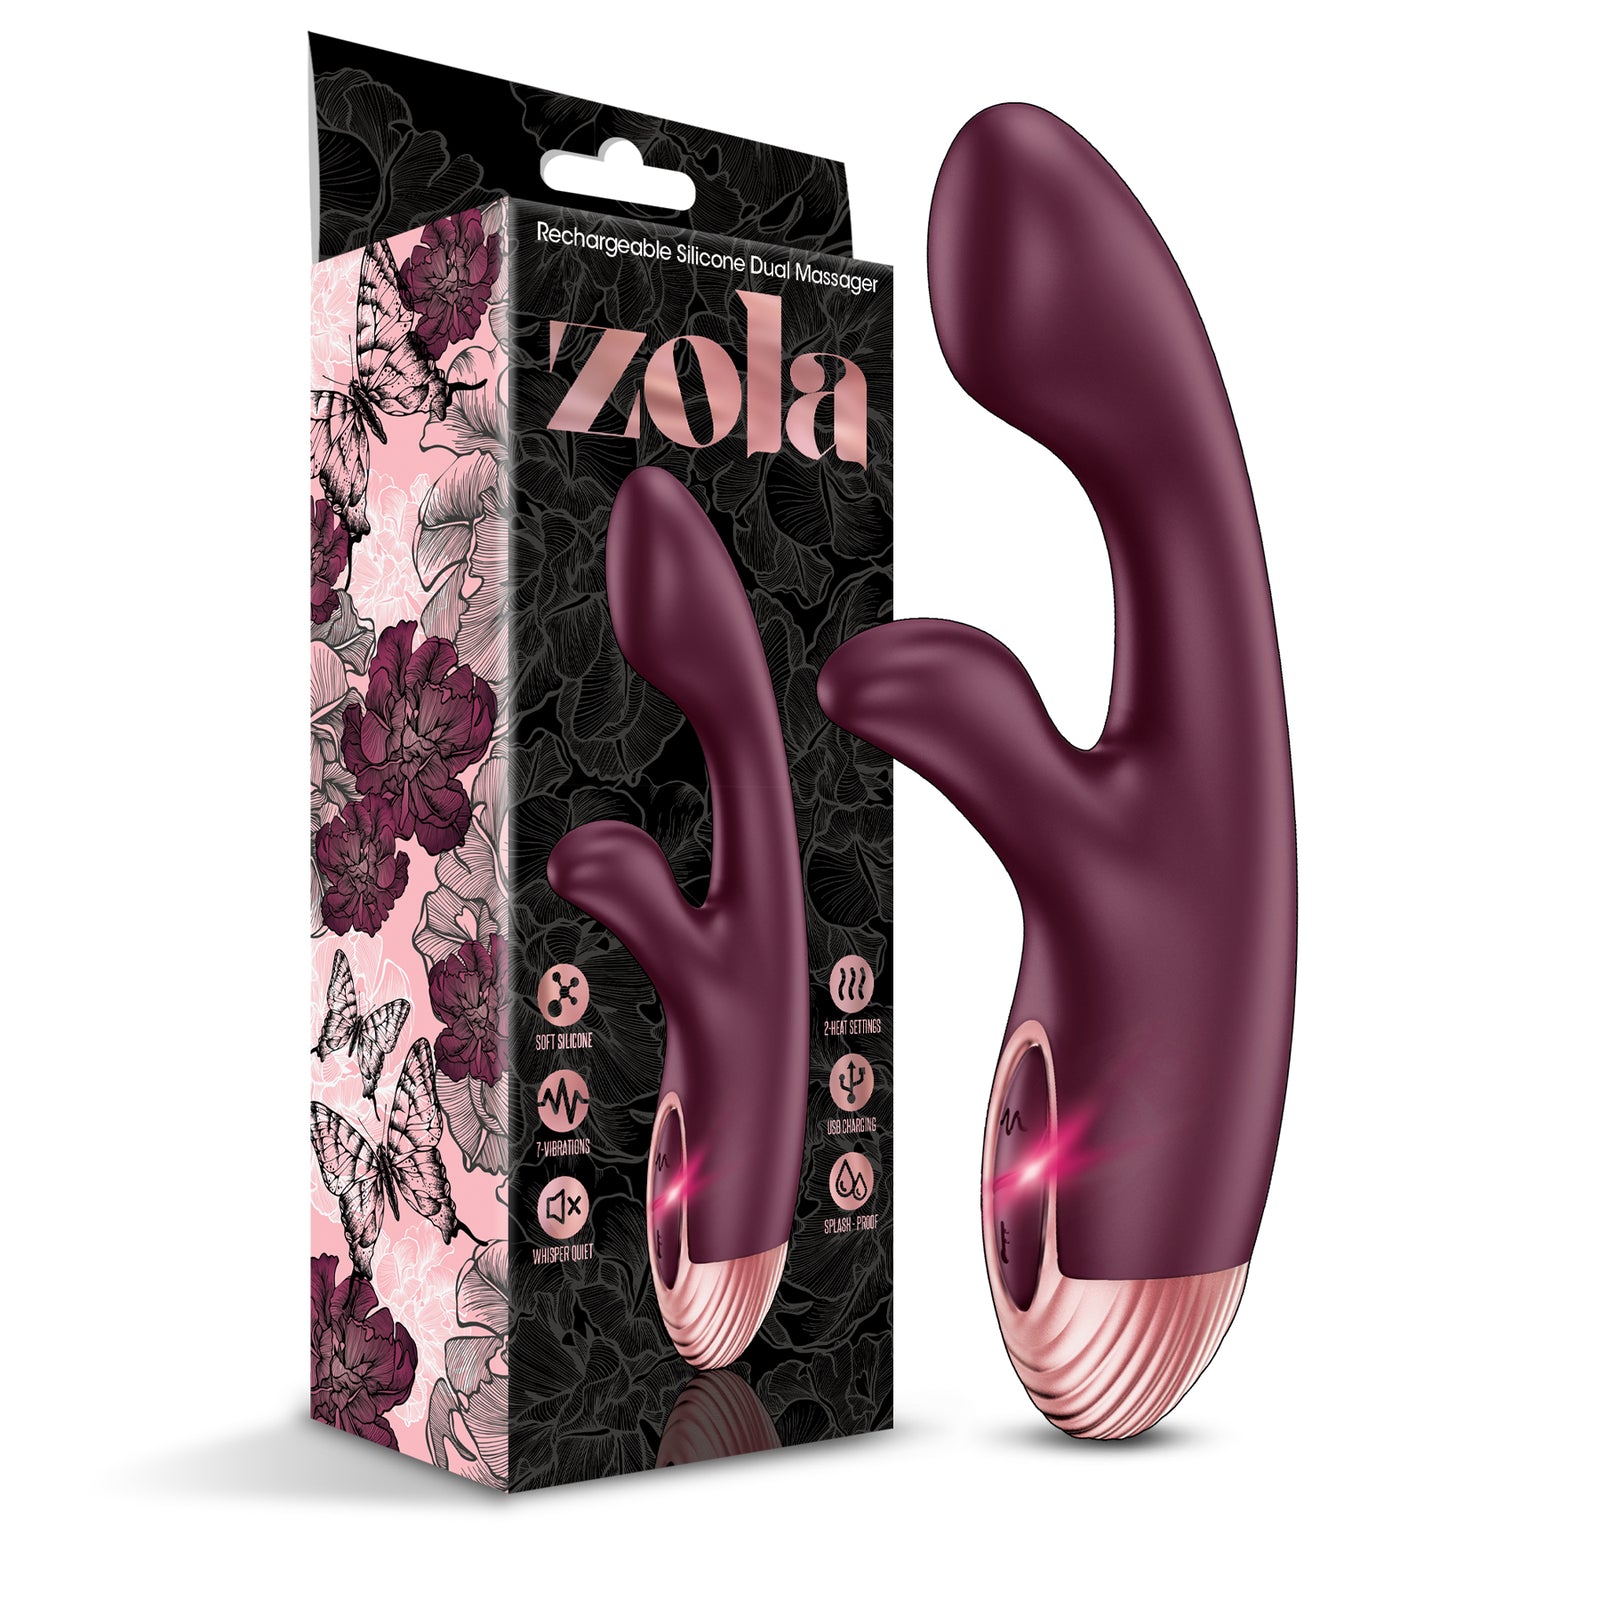 Zola Rechargeable Silicone Warming Dual Massager, Burgundy - THES